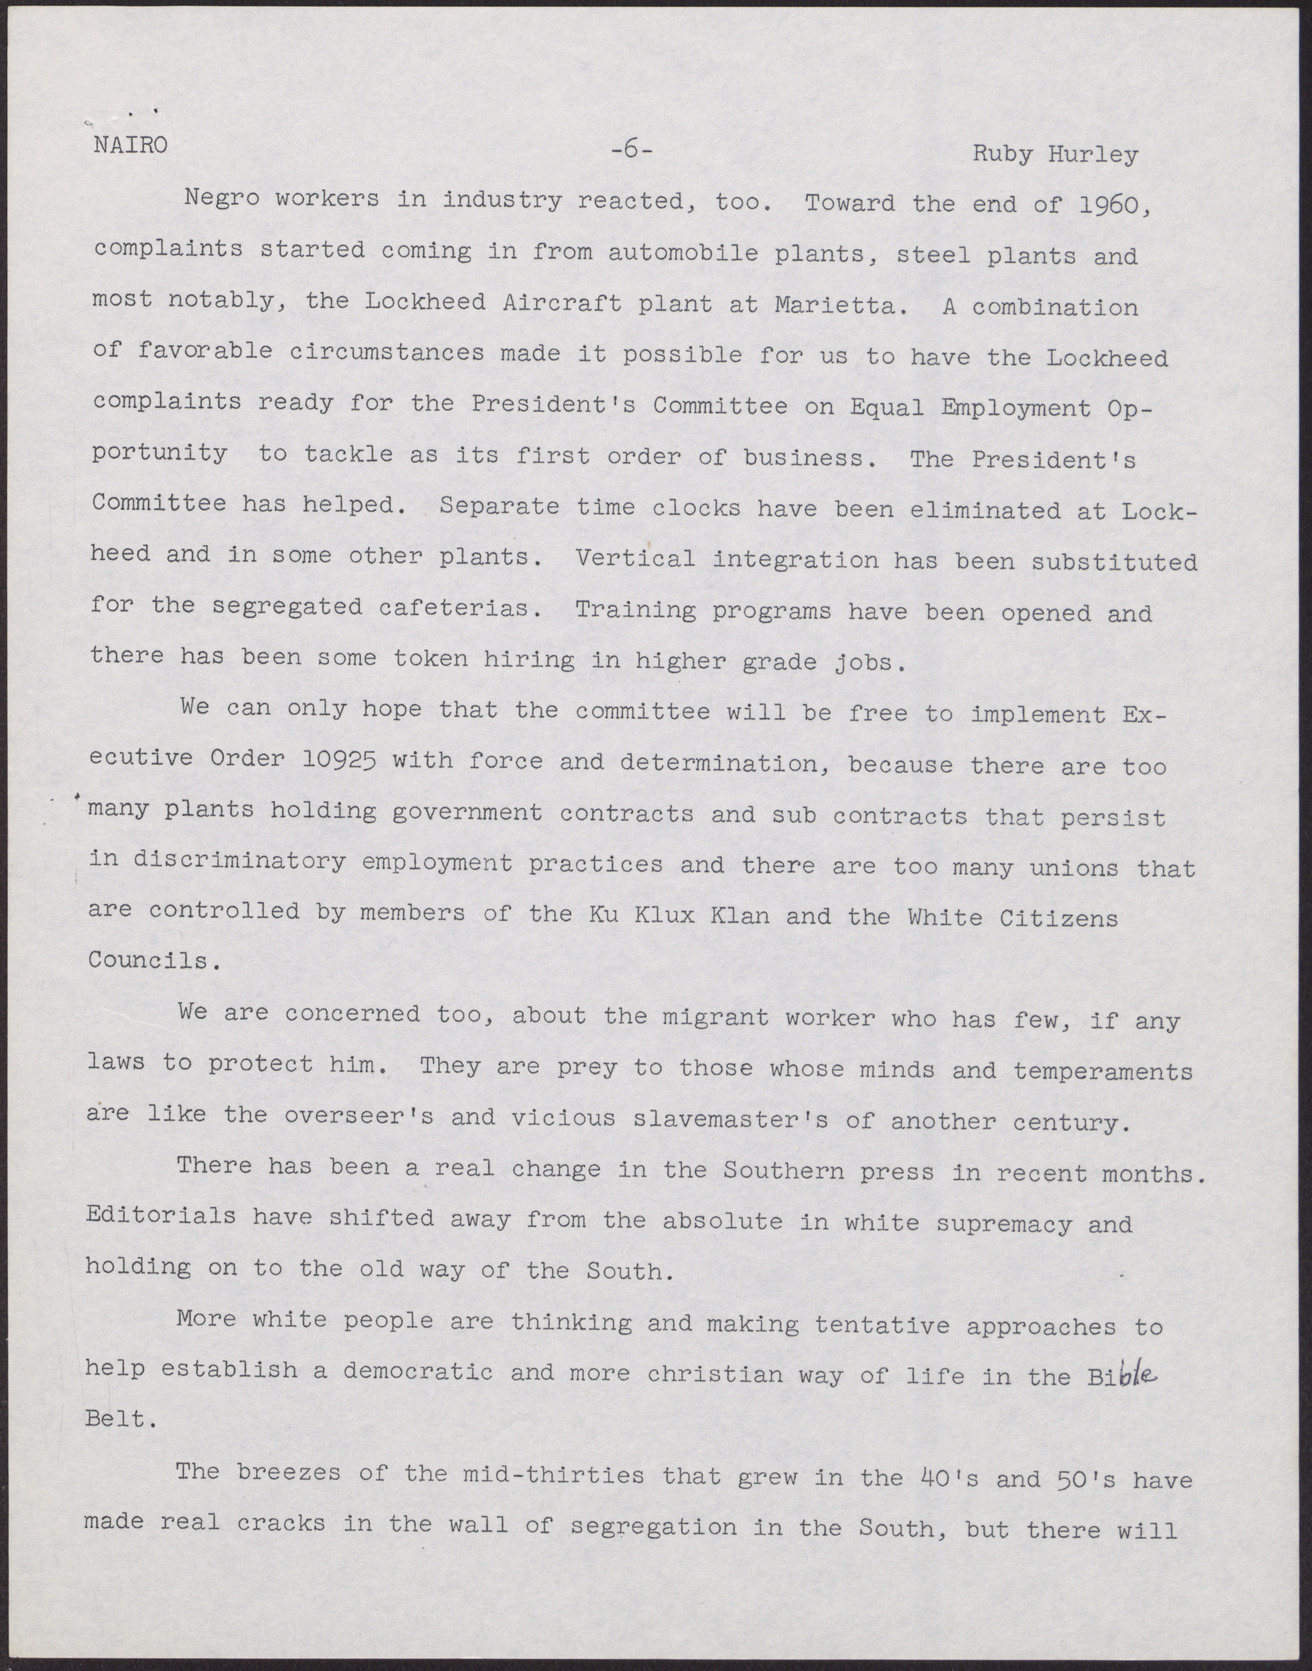 Paper for NAIRO Conference (7 pages), November 10, 1961, page 6